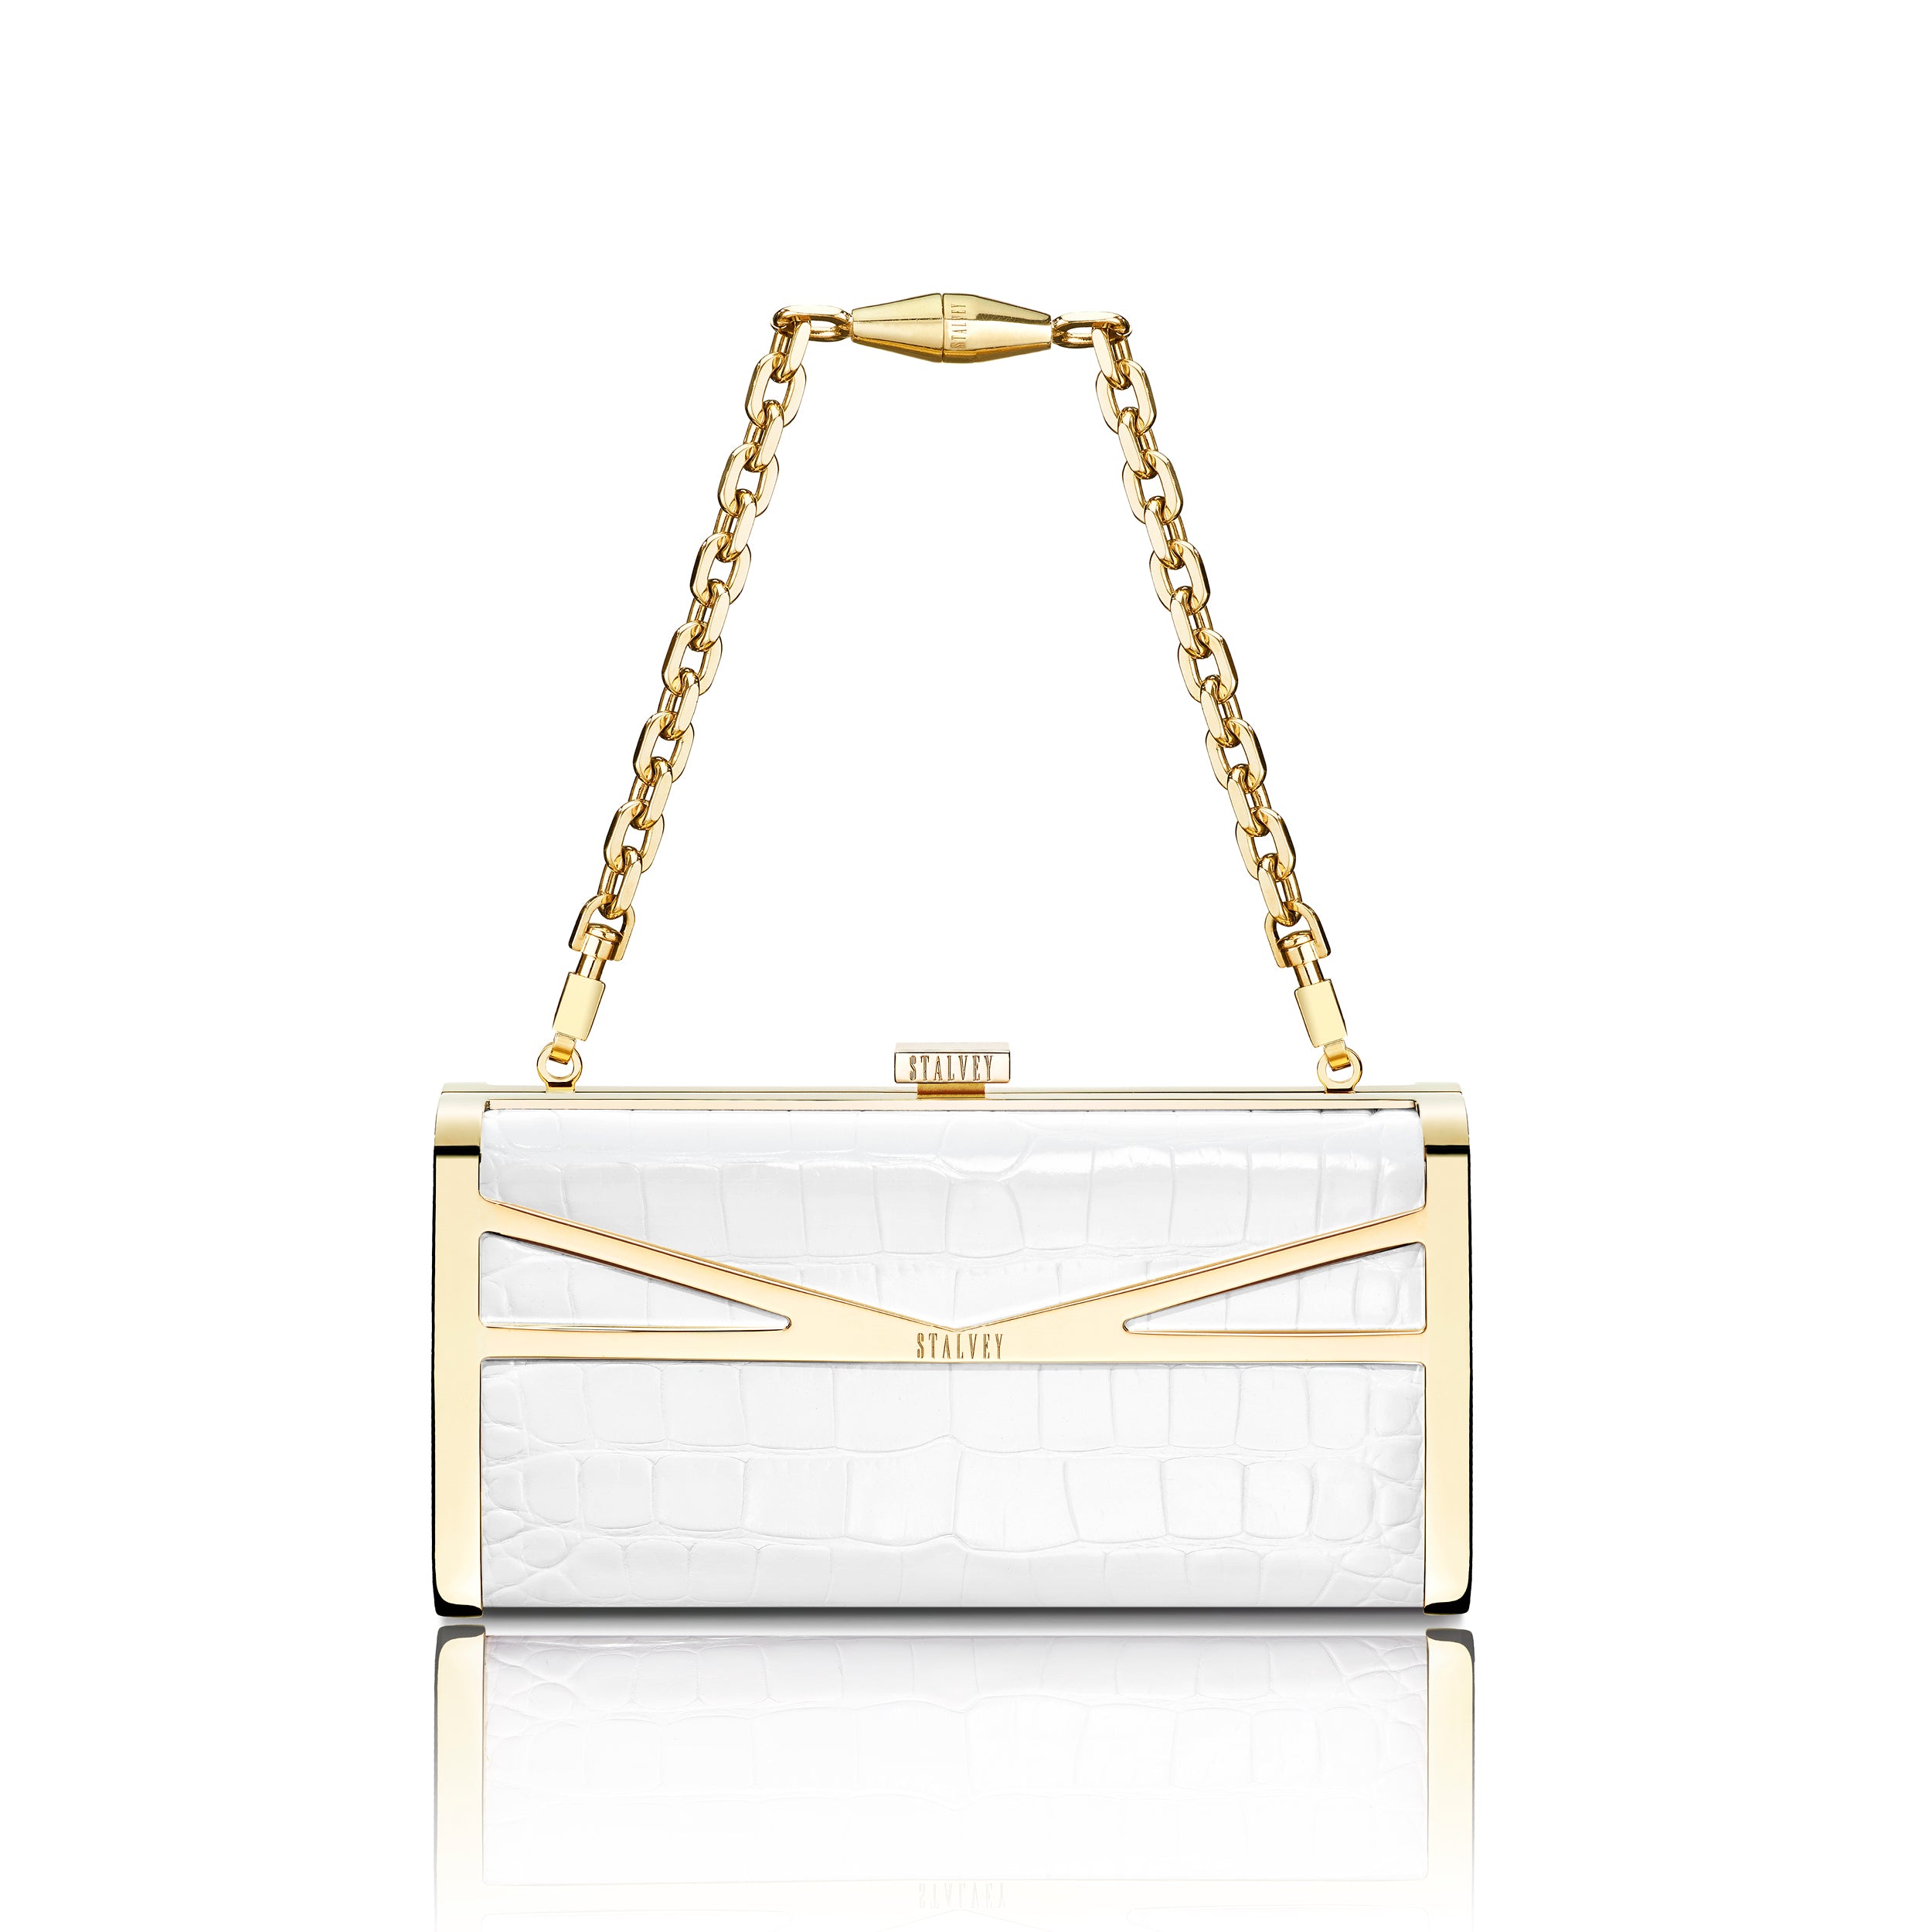 STALVEY Square Clutch in White Alligator with 24kt Gold Hardware Front View with Chain